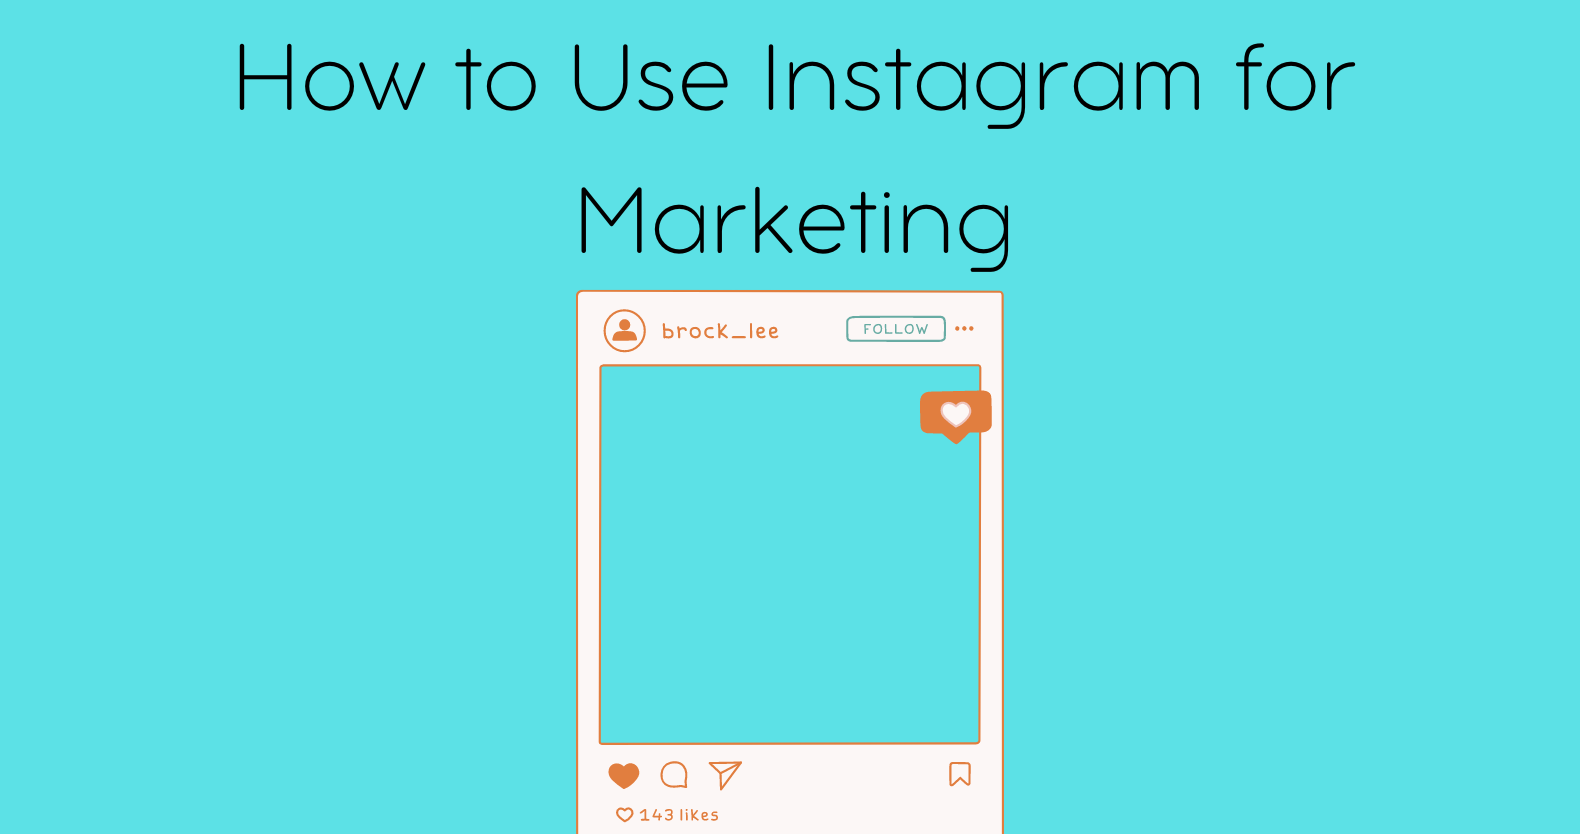 How to Use Instagram for Marketing (1)